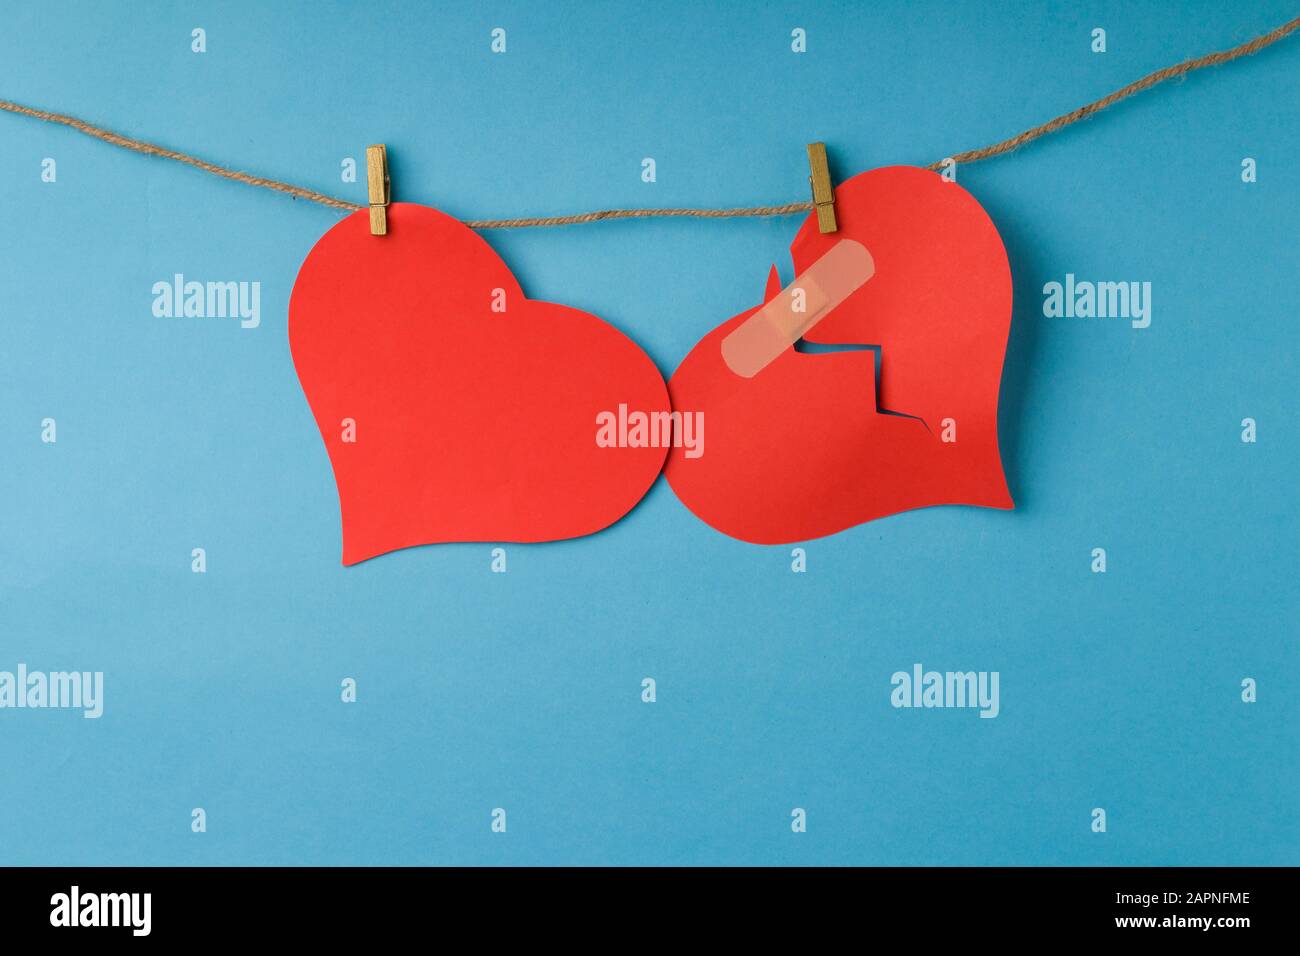 Red broken heart and whole heart hanging on rope. Stock Photo